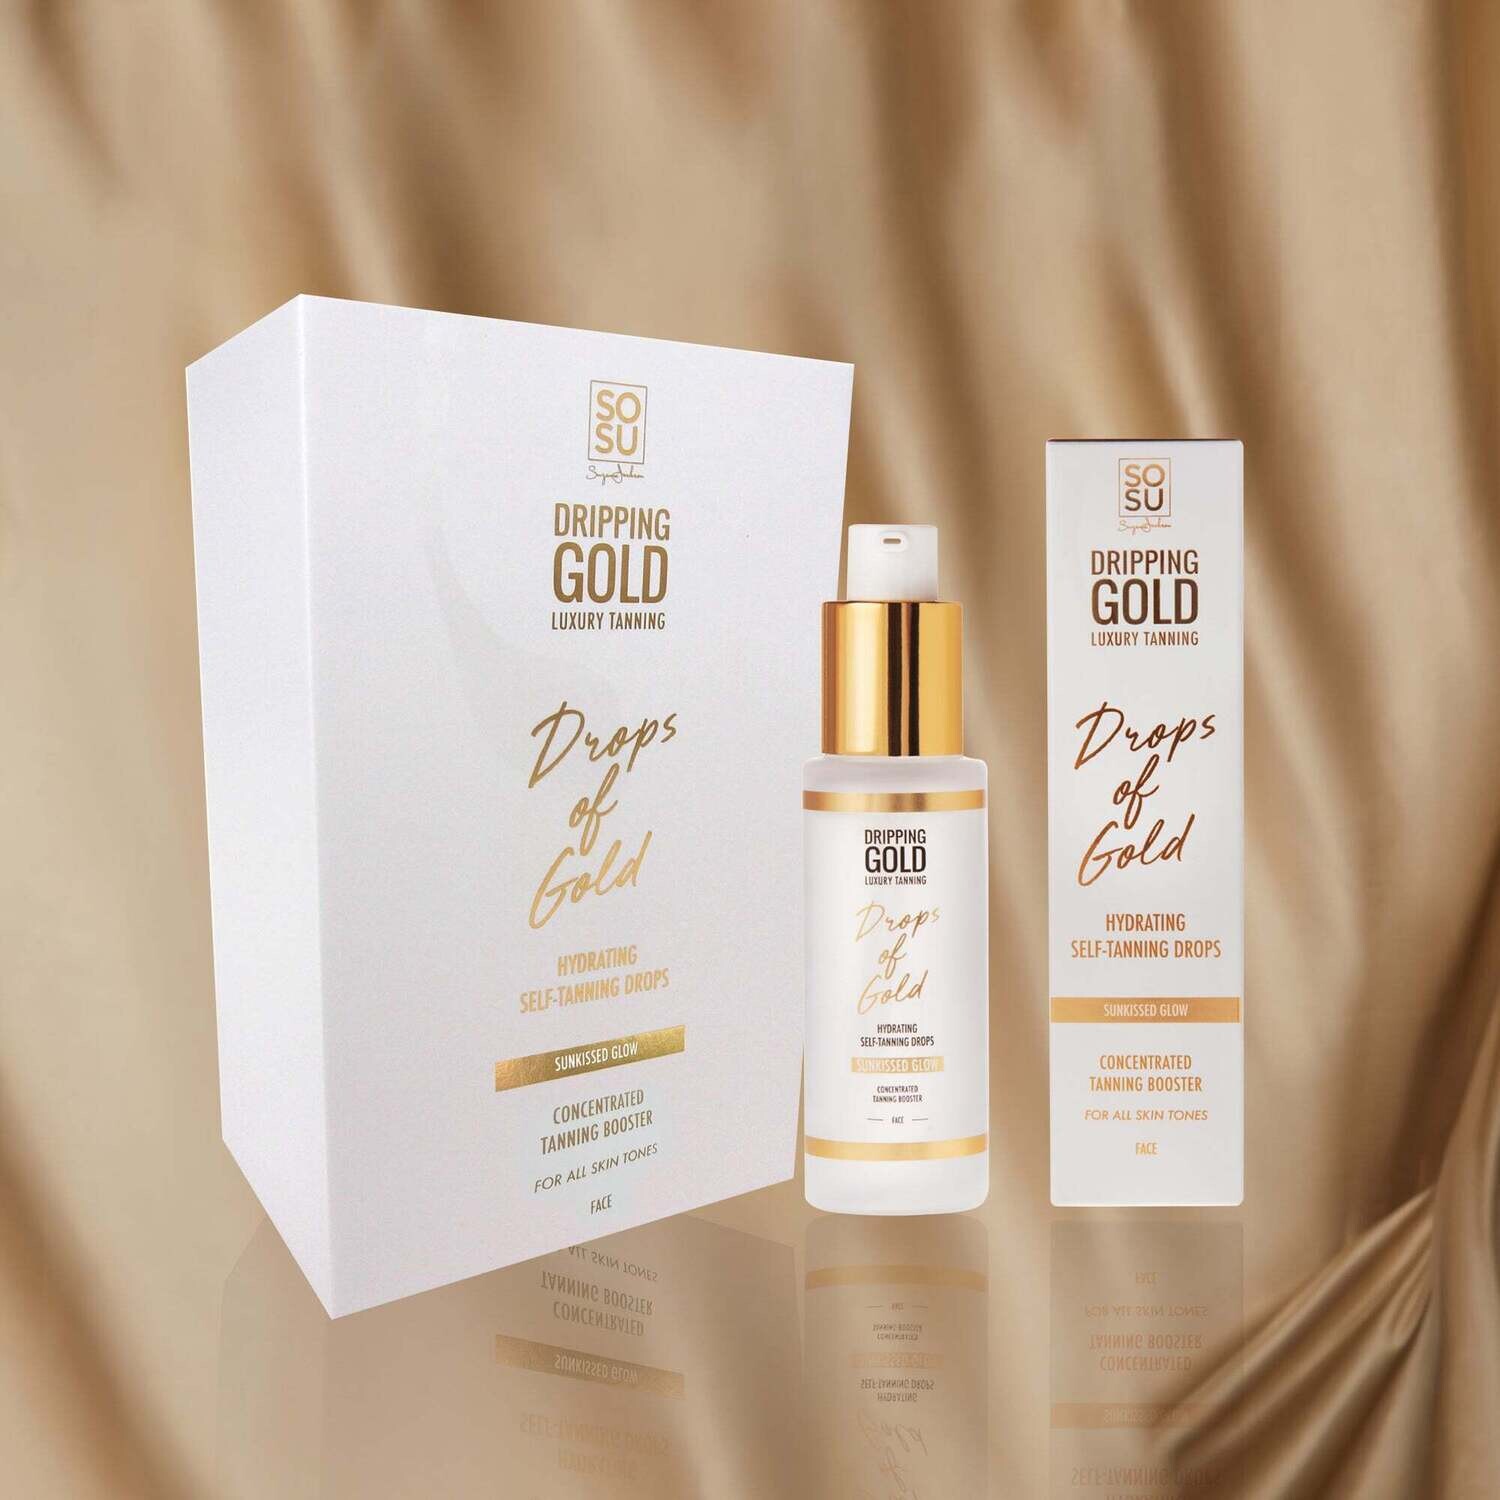 Suzanne Jackson -DROPS OF GOLD HYDRATING SELF-TANNING DROPS